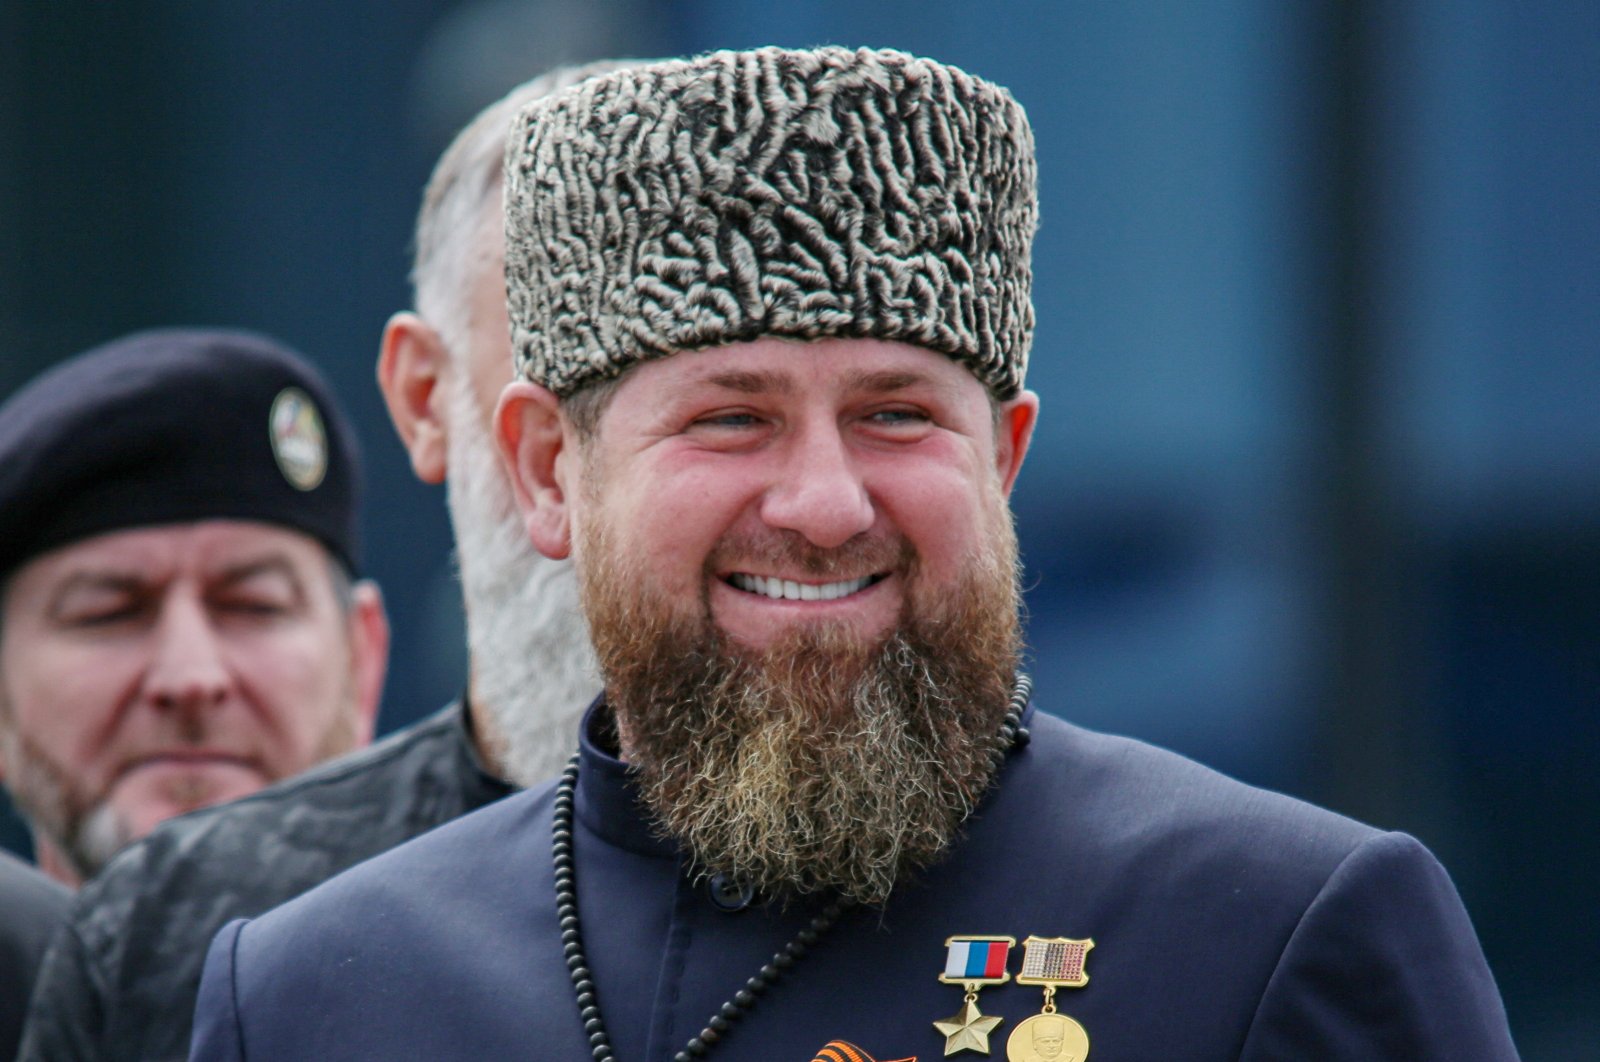 Head of the Chechen Republic, Ramzan Kadyrov, attends a military parade on Victory Day which marks the 77th anniversary of victory over Nazi Germany in the Second World War, in the Chechen capital Grozny, Russia May 9, 2022. (Reuters File Photo)